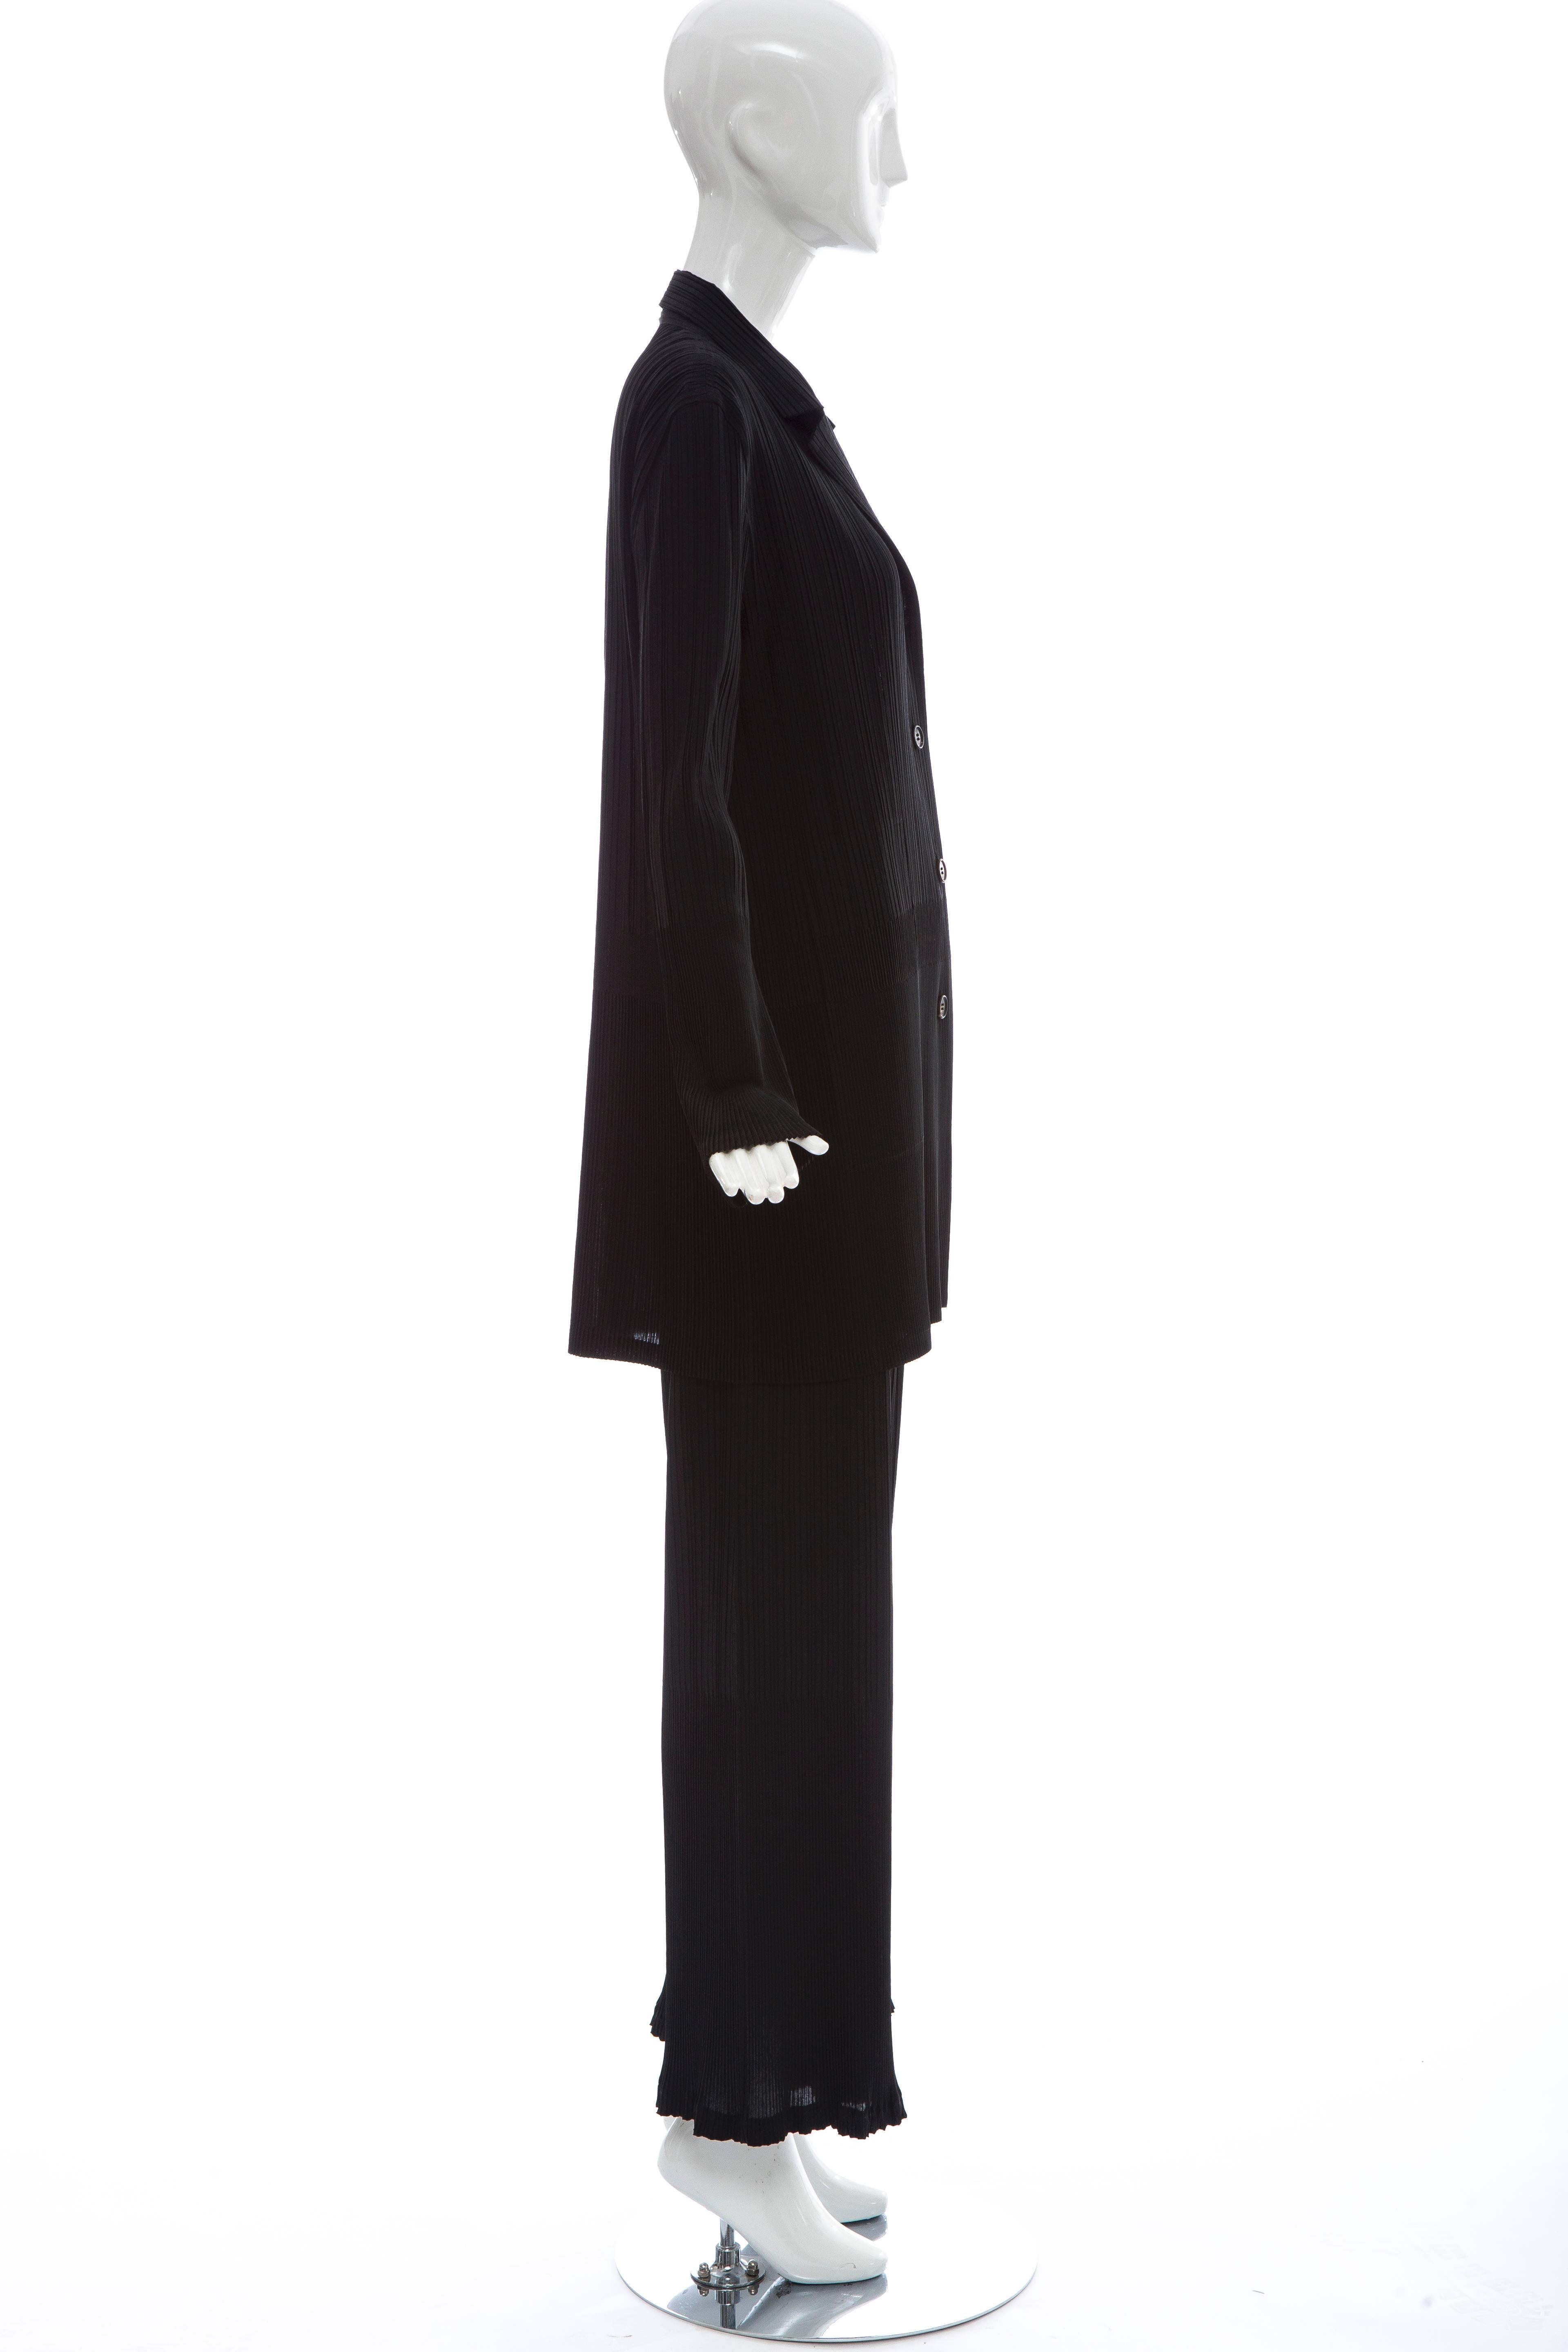 Issey Miyake, White Label, black pleated polyester button front elastic waist pant suit.

Japan: Size 4

Jacket: Bust 48, Waist 44, Length 33.5
Pant: Waist 34, Hips 48, Length 40 